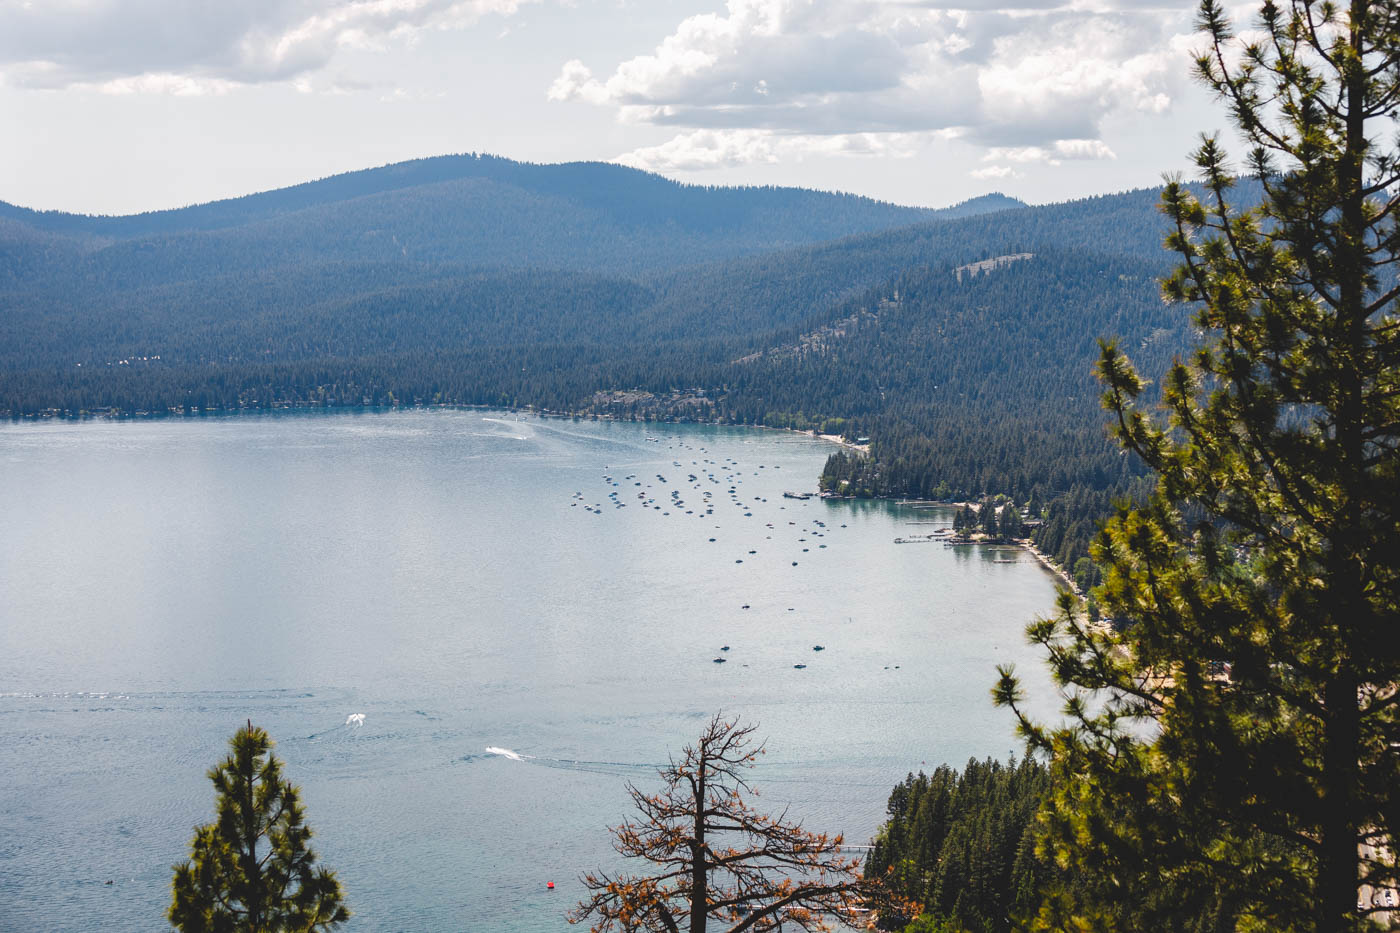 A view over boats on Lake Tahoe with trees surrounding the lake from the Stateline Lookout Trail.